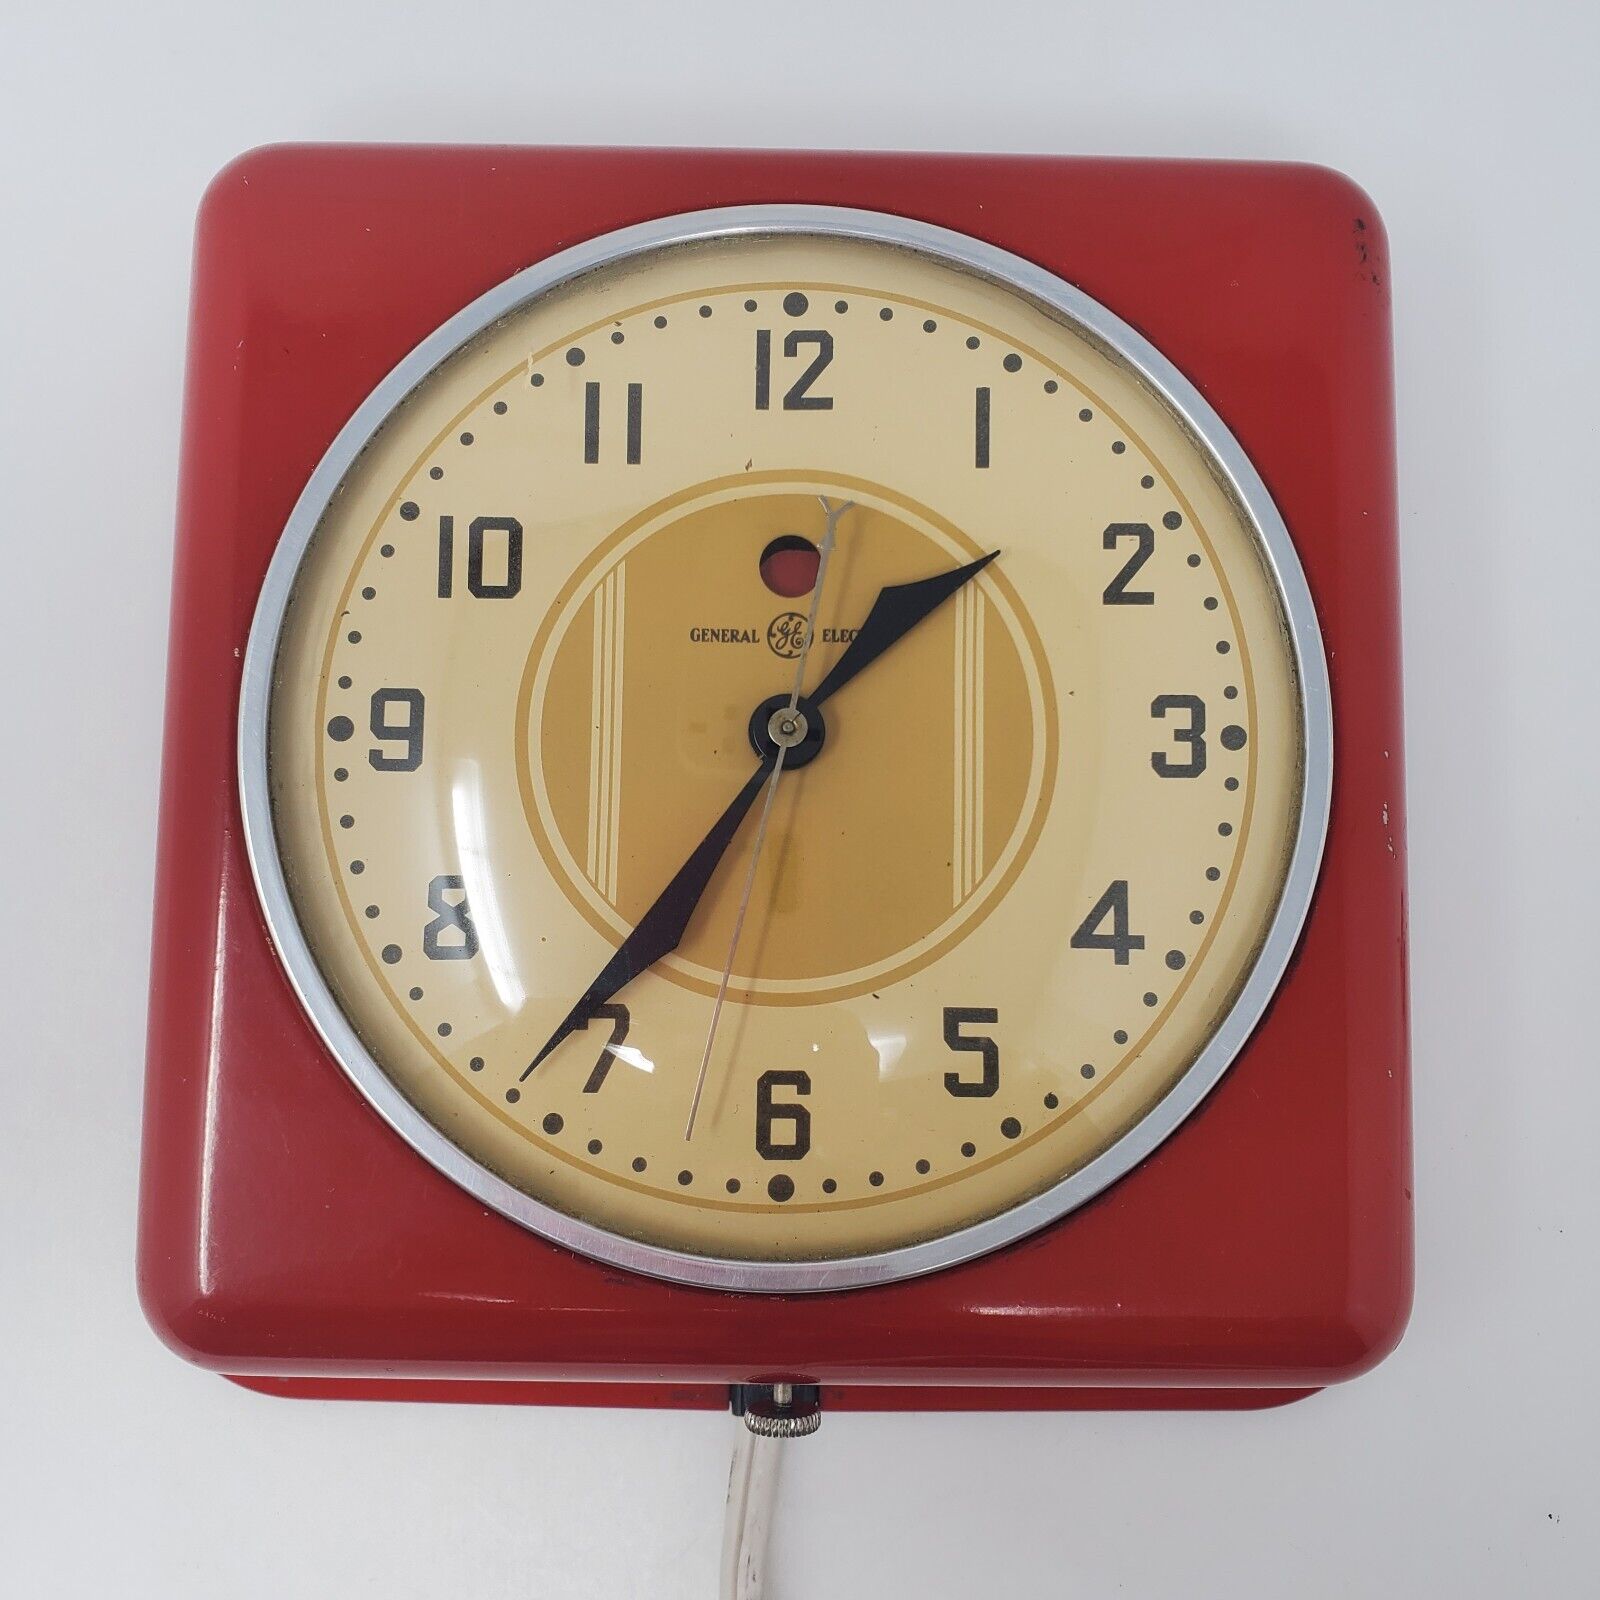 VTG General Electric Red Kitchen Wall Clock Model 2H08, Works Mid Century Modern